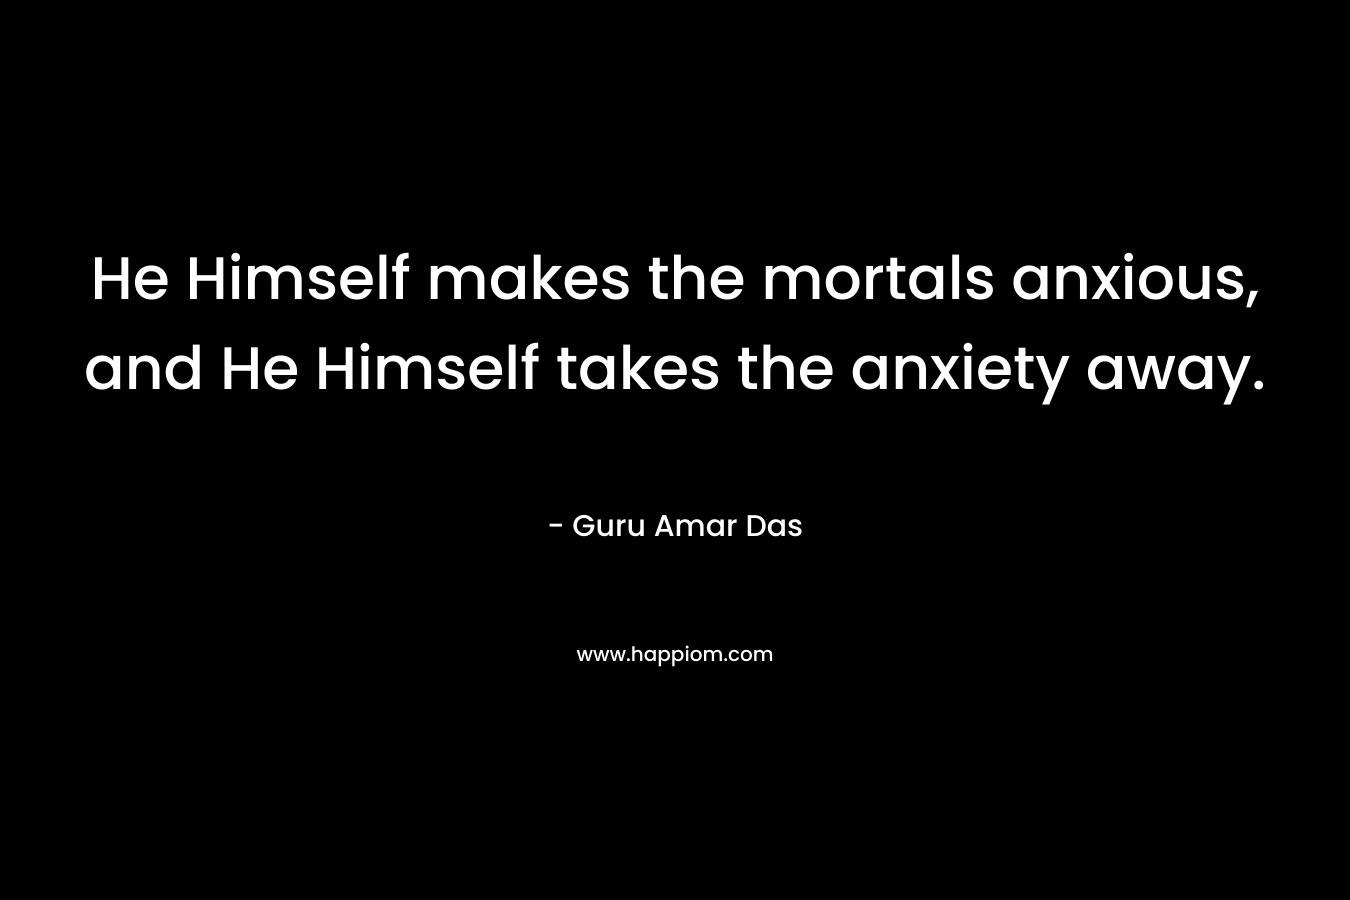 He Himself makes the mortals anxious, and He Himself takes the anxiety away. – Guru Amar Das